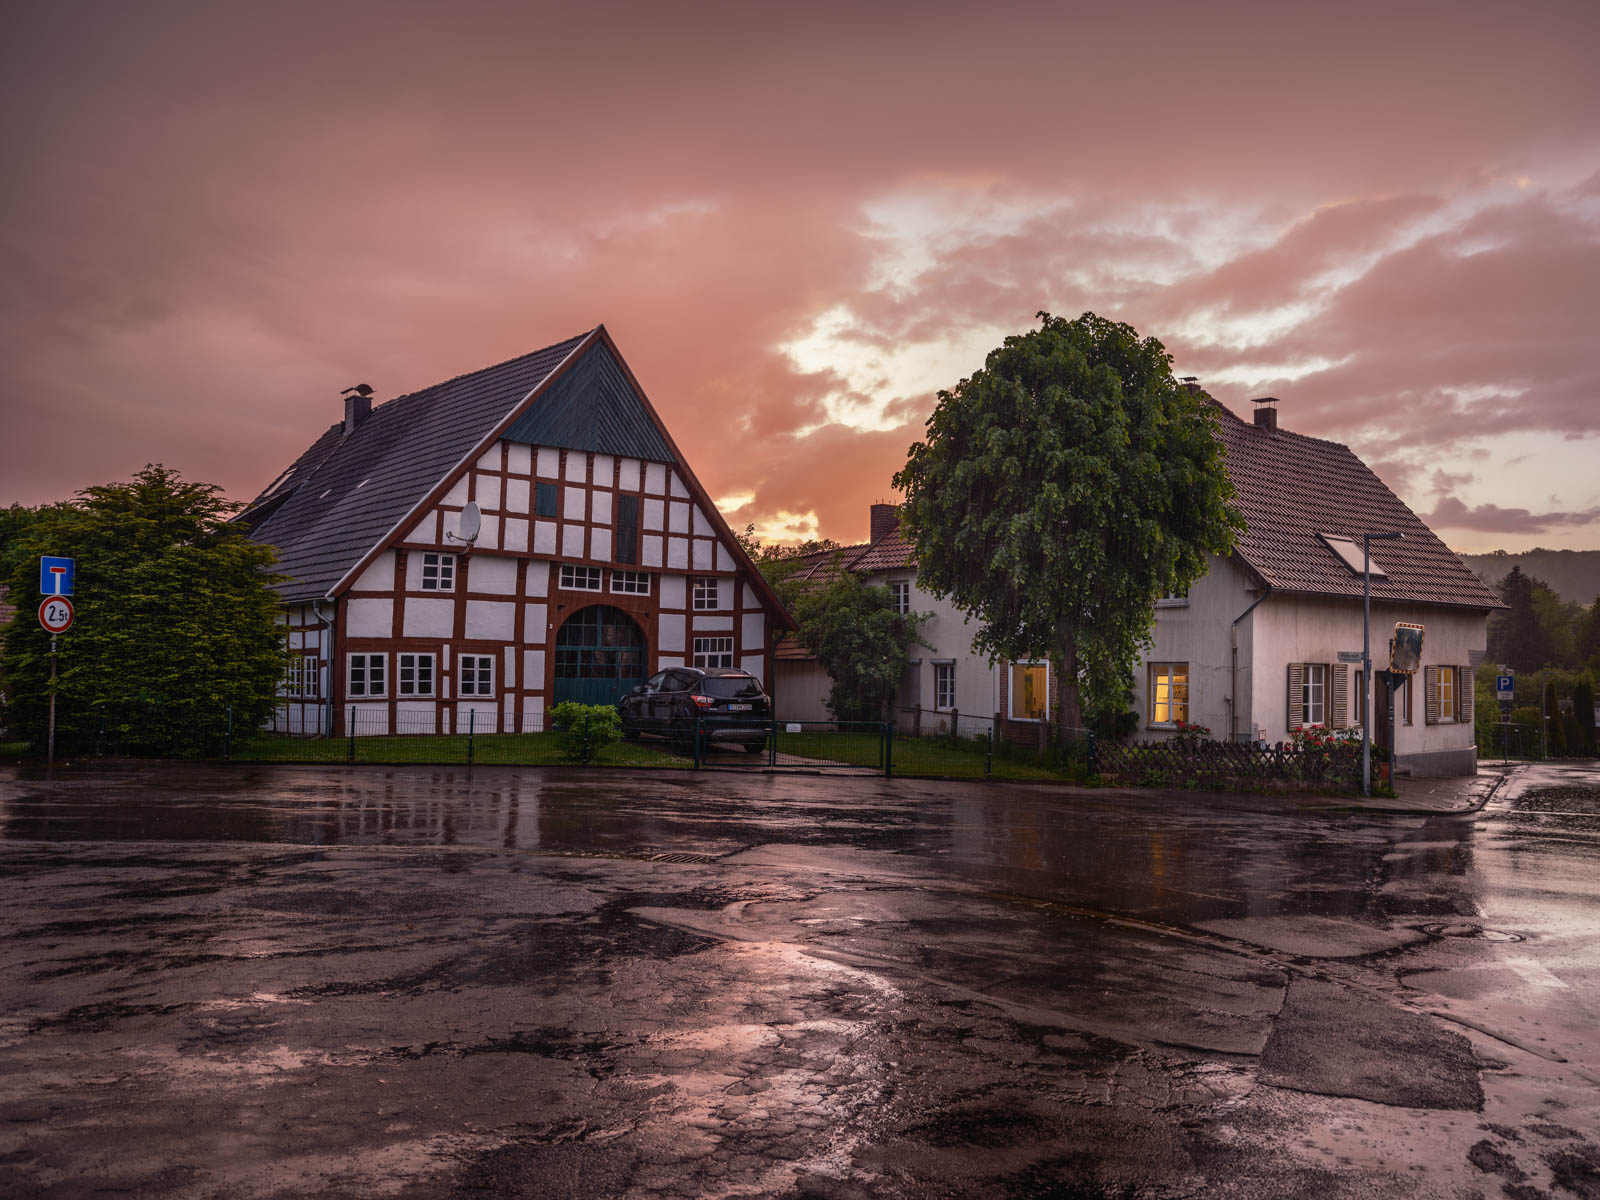 Rain clouds at dusk over Kirchdornberg in May 2021 (Bielefeld, Germany).